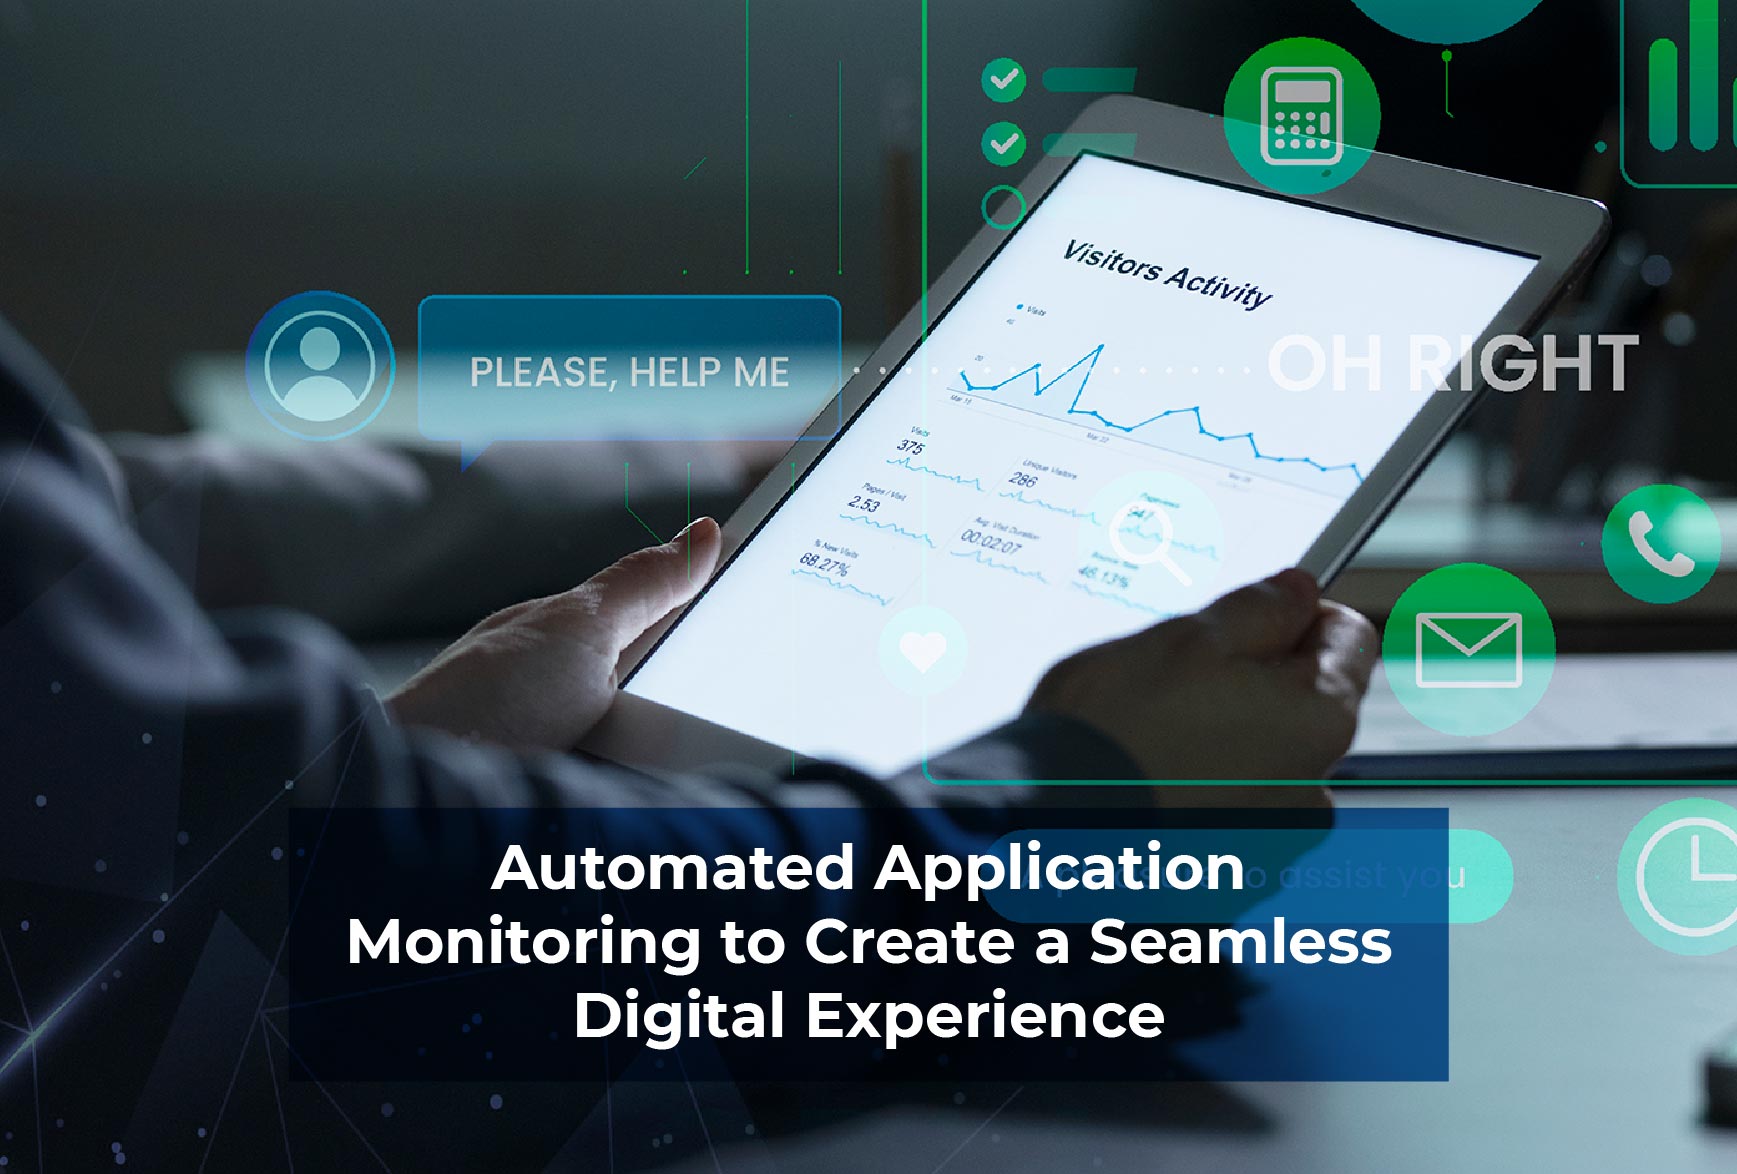 Automated Application Monitoring to Create a Seamless Digital Experience